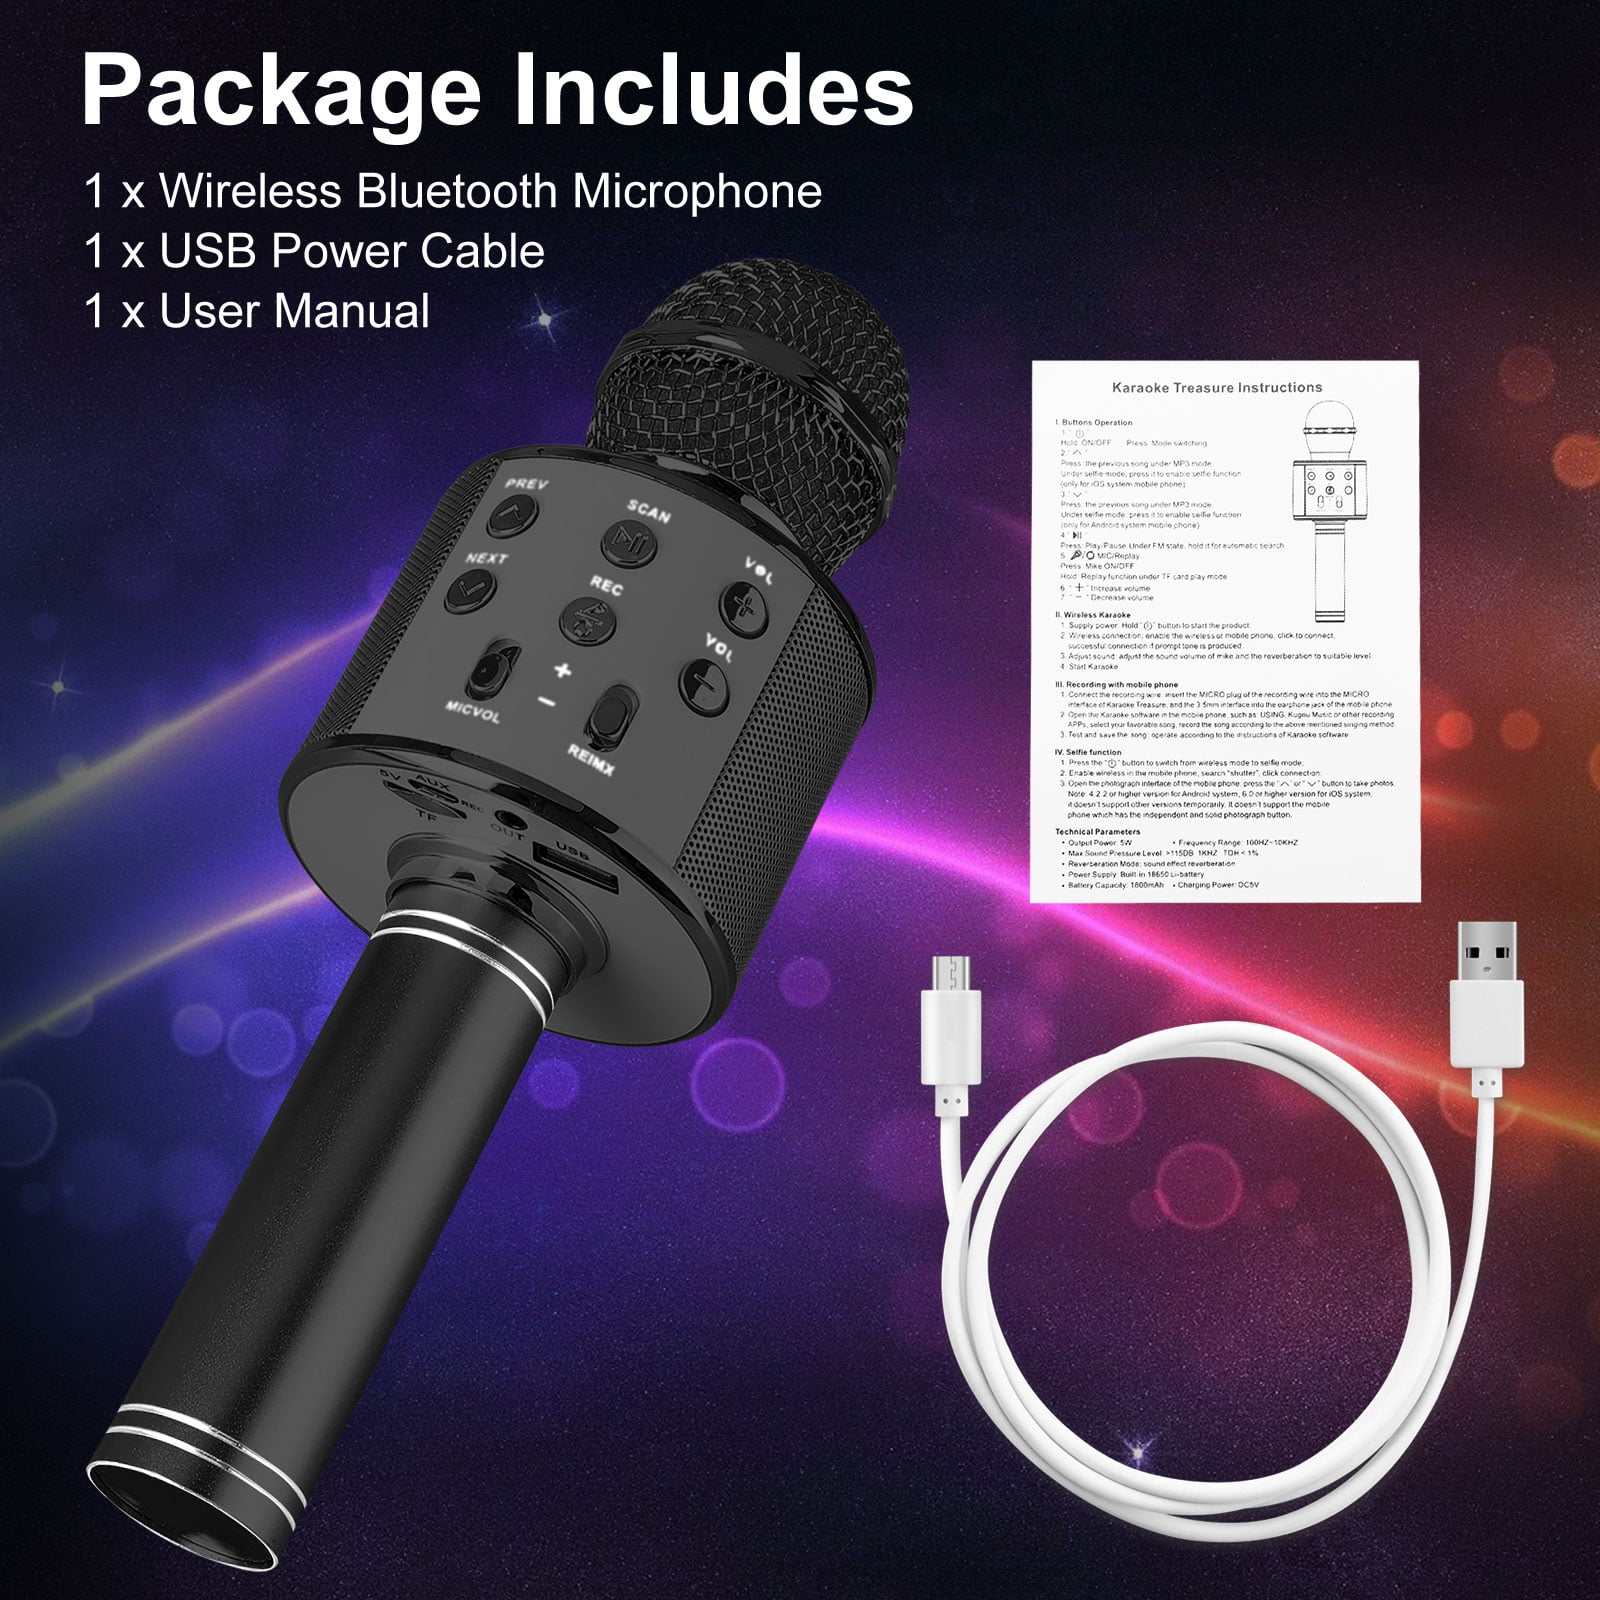 Three Way Connection Handheld Portable Karaoke Machine 7TECH Wireless 4 in 1 Bluetooth Karaoke Microphone Indoor/Outdoor Party Player with Record Function Rose 